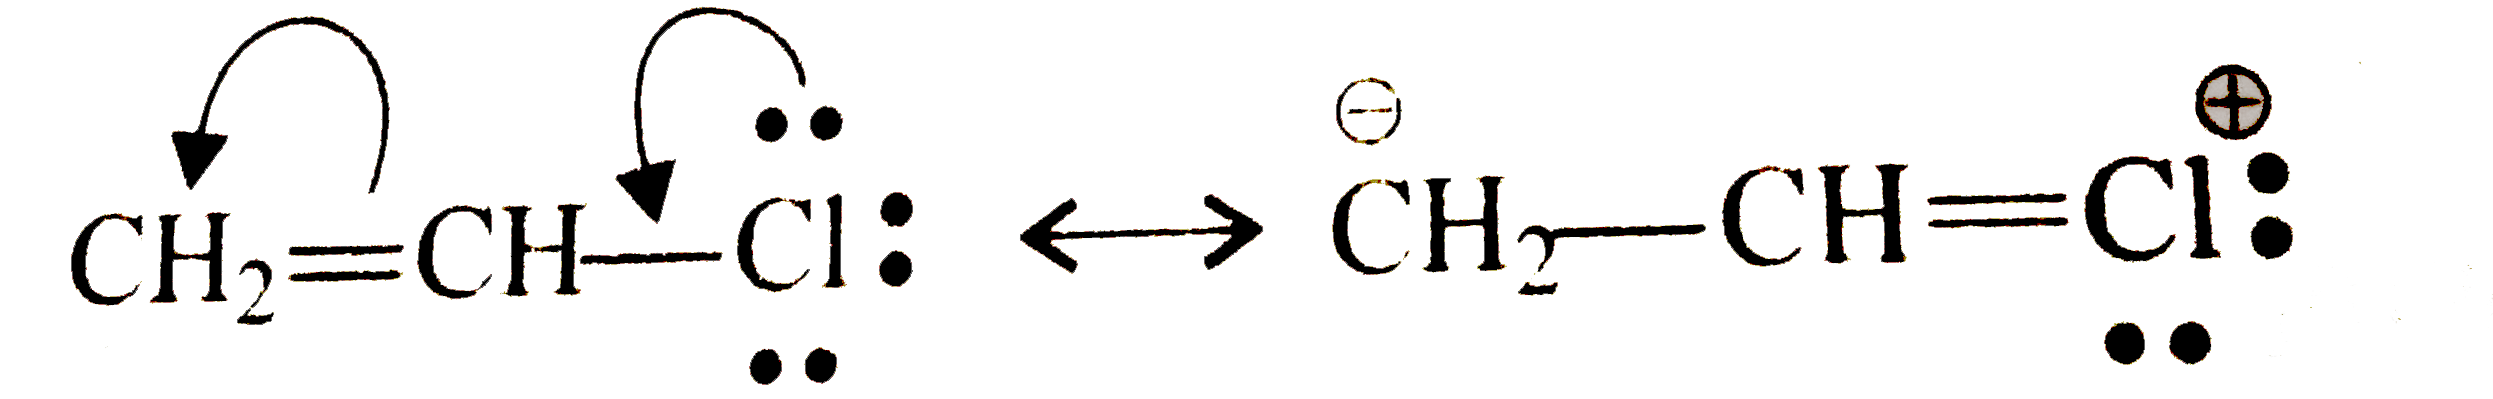 In a substance that are resonance hybirds, the measured length of given bond usually differs form that predicted form any one of the contributing sturctures. Chloroethylene is found by measurement to have a C-Cl distance of 1.69A. This is shorter than C-Cl bond in such compounds a methly chloride (1.77A), an indication that in chloroethylene C-Cl bond has some double bond character.      Which of the following has shortest C-Cl bond?